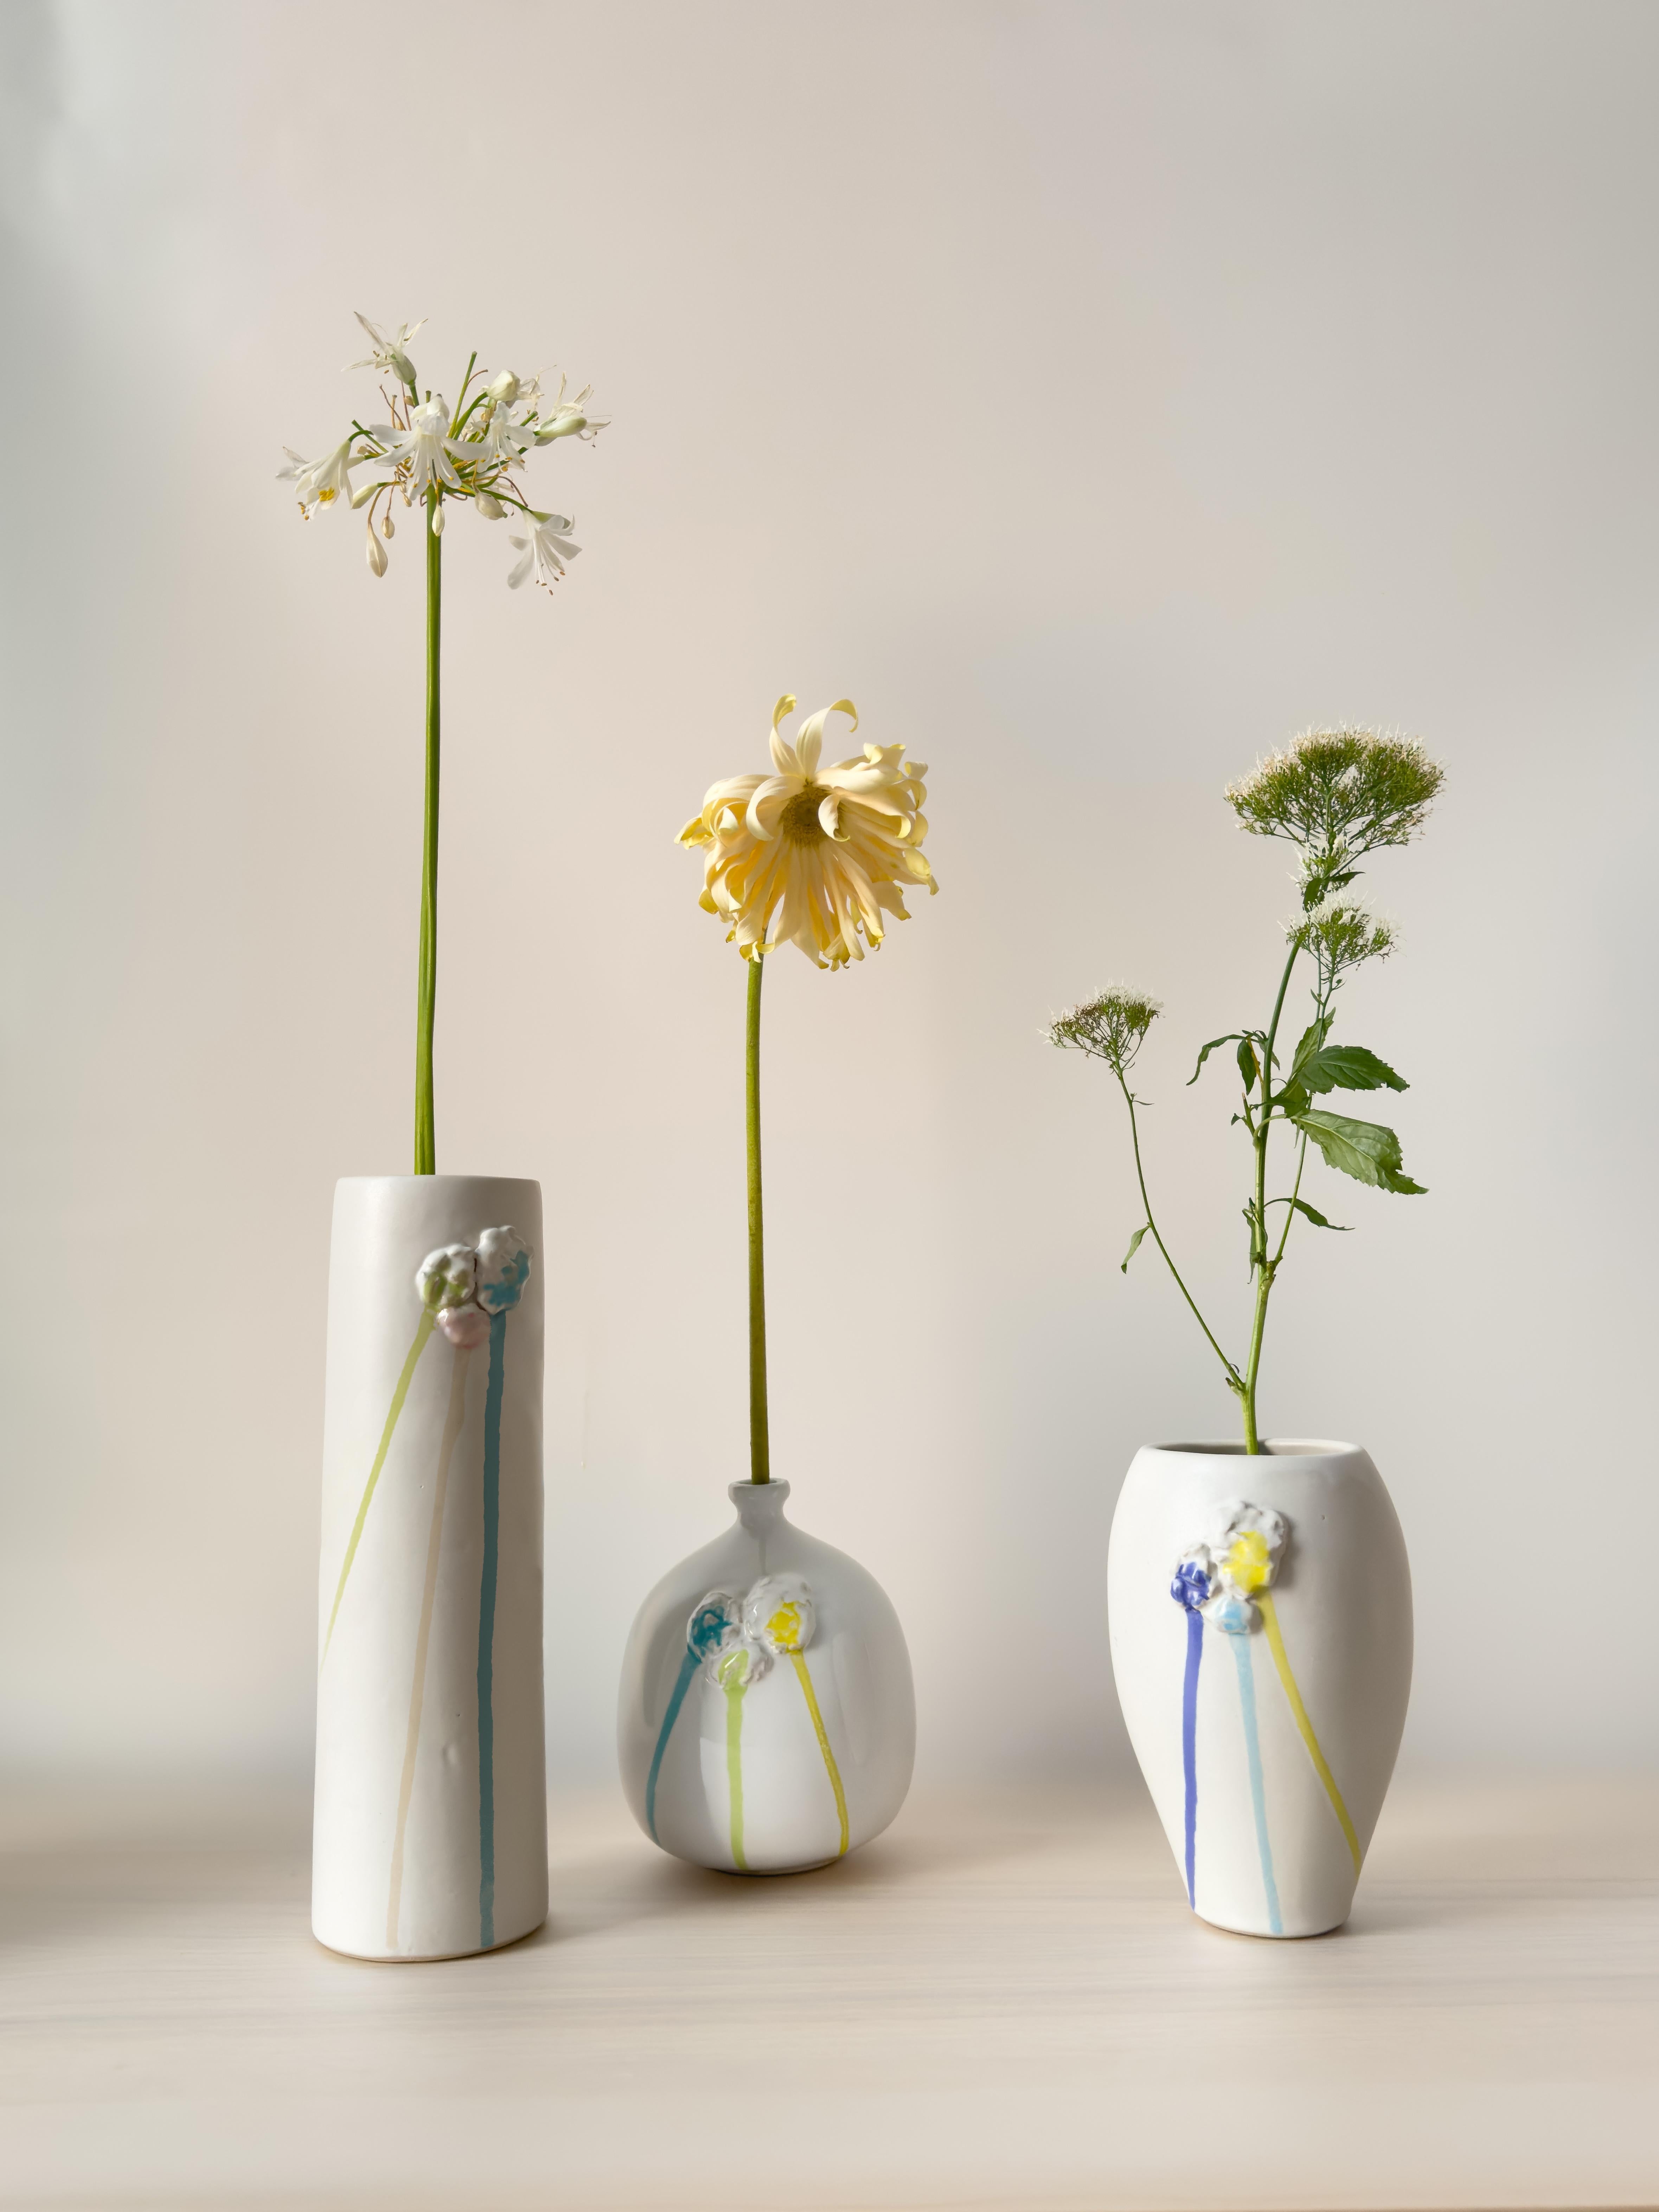 Meet the Medium Vase from our Striving for Imperfection Collection. This piece stands at 7 inches, and boasts the perfect width to house a robust boquet of your favorite stems. 

The pieces in this collection are made from a mix of 60% recycled